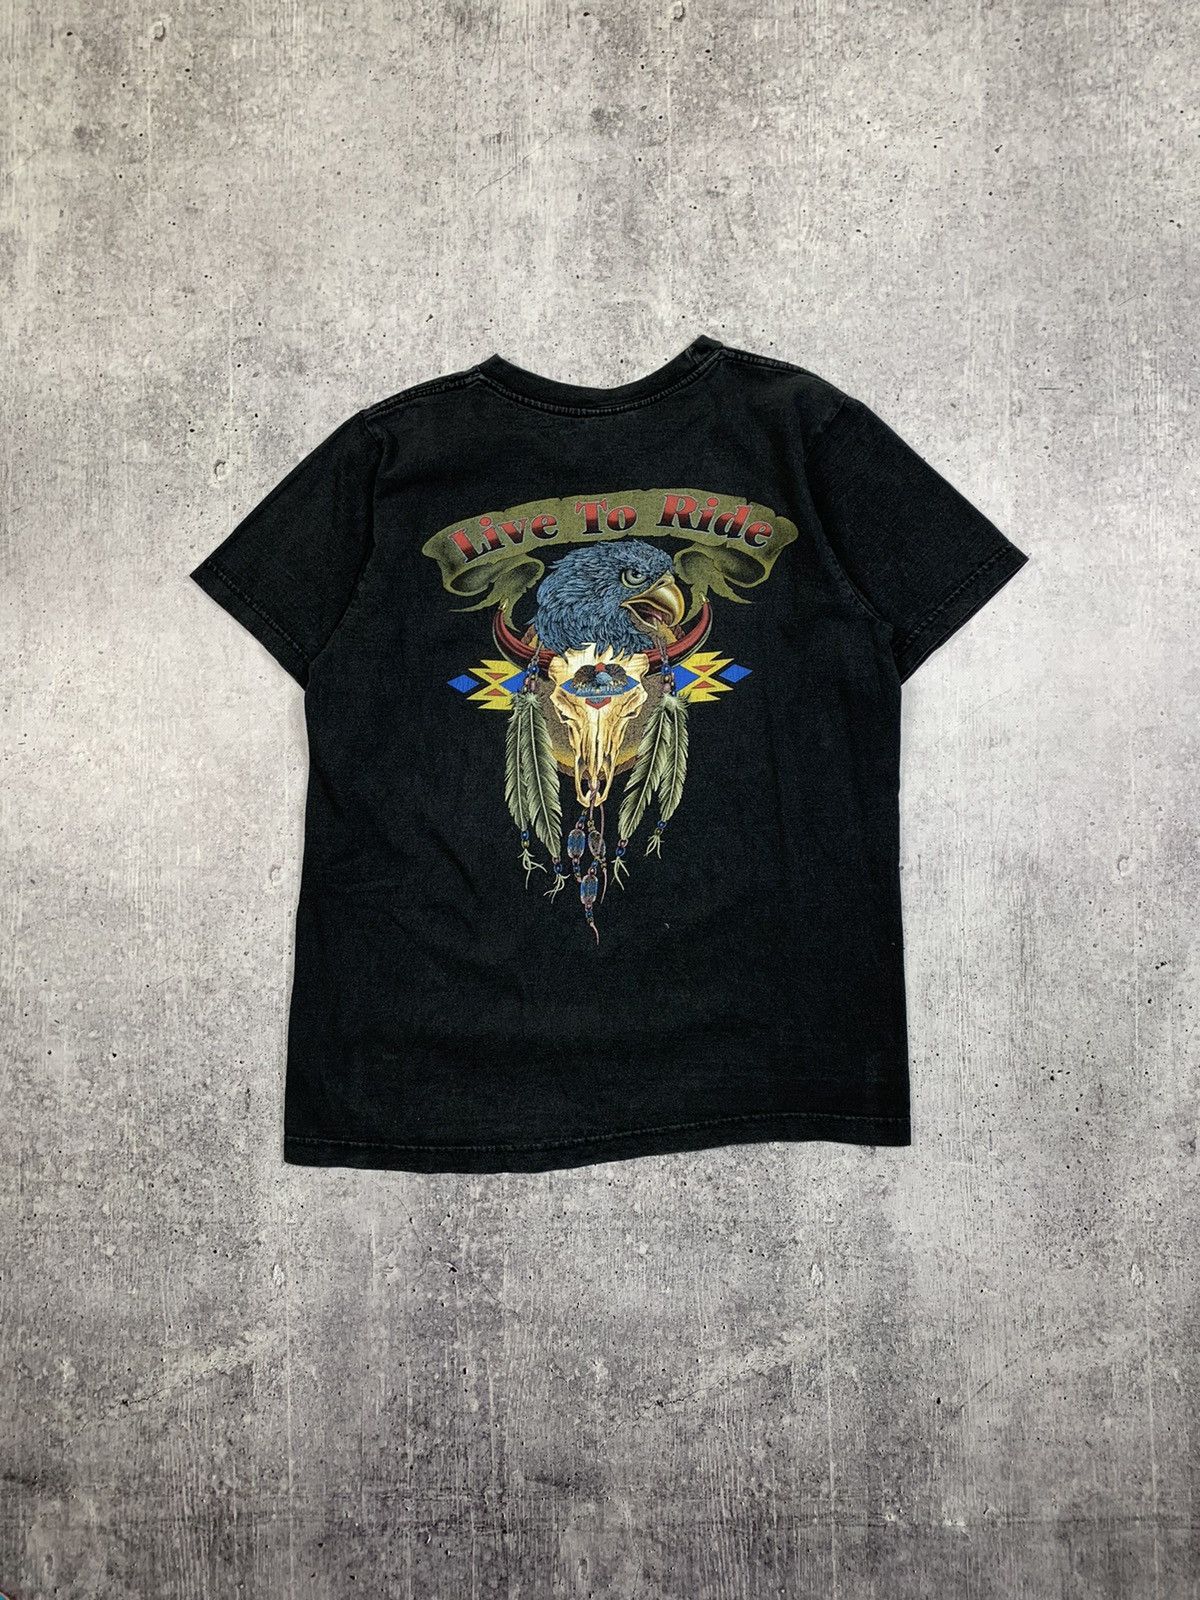 Pre-owned Harley Davidson X Vintage Live To Ride Harley Davidson Style Bootleg T Shirt In Black